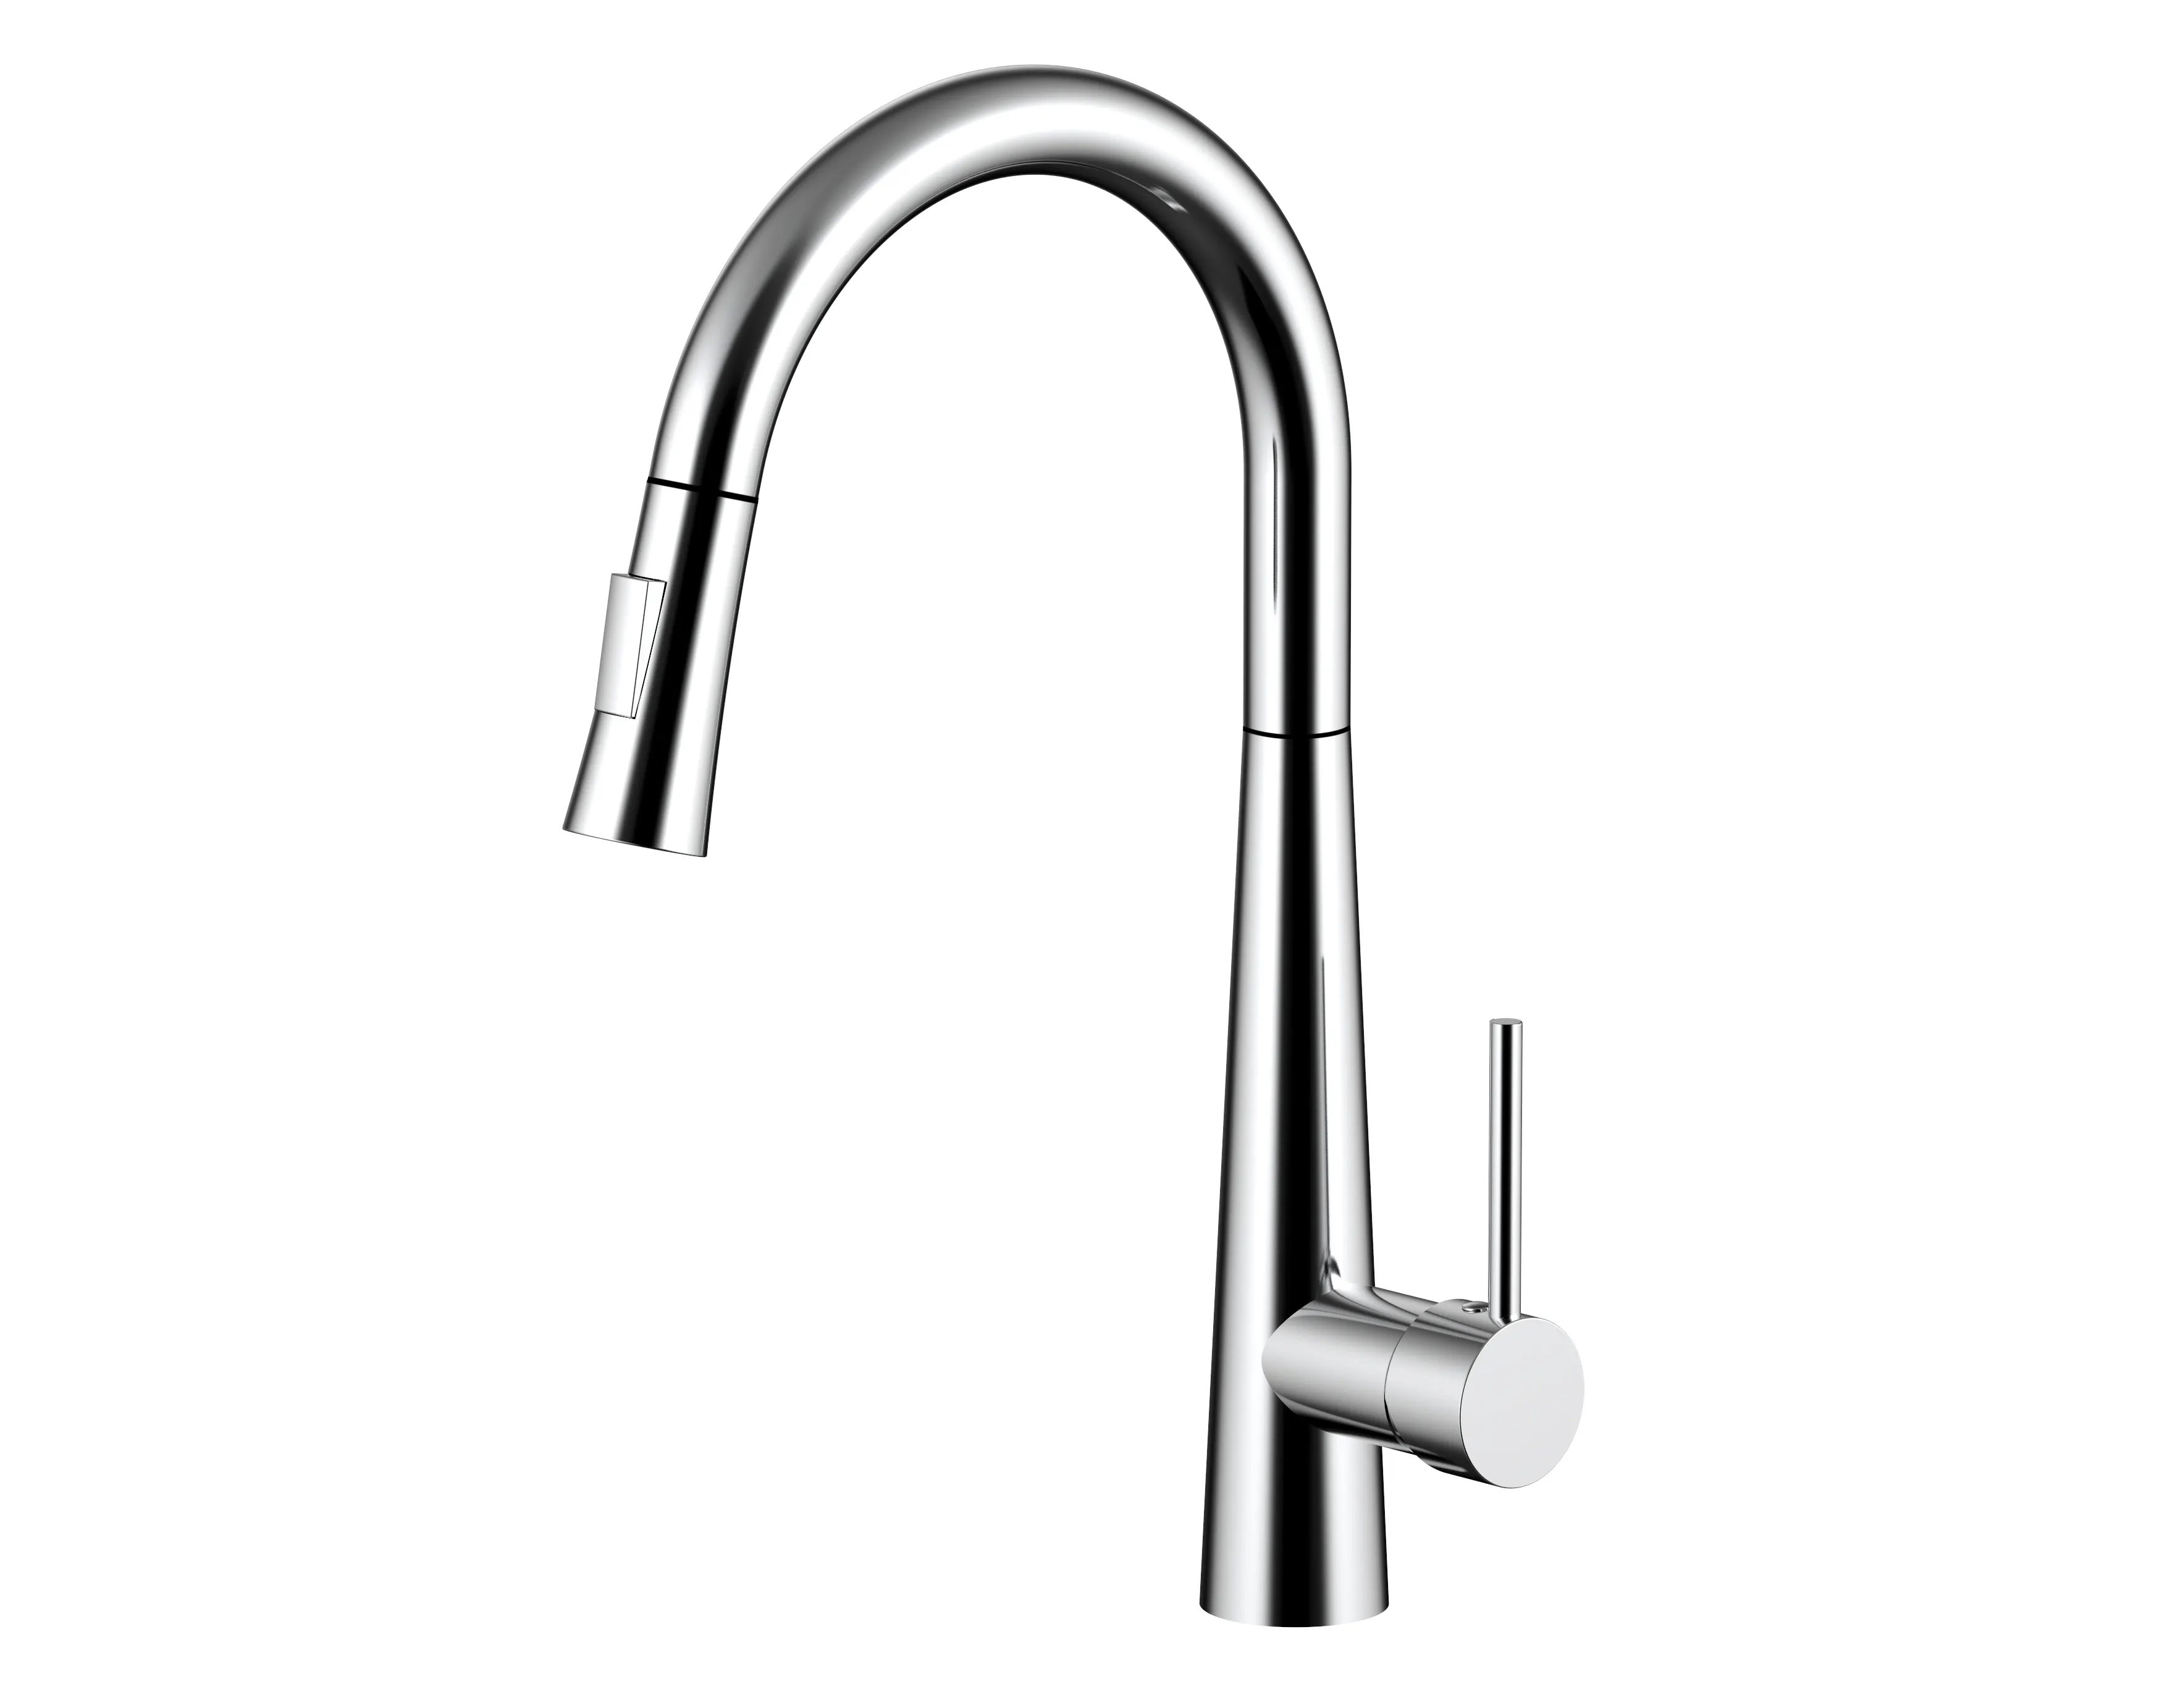 Island Kitchen Sink Chrome Plating Finish OEM Dual Functions Sprayer Pull Down Out Mixer Tap Faucet with cUPC CE and ACS